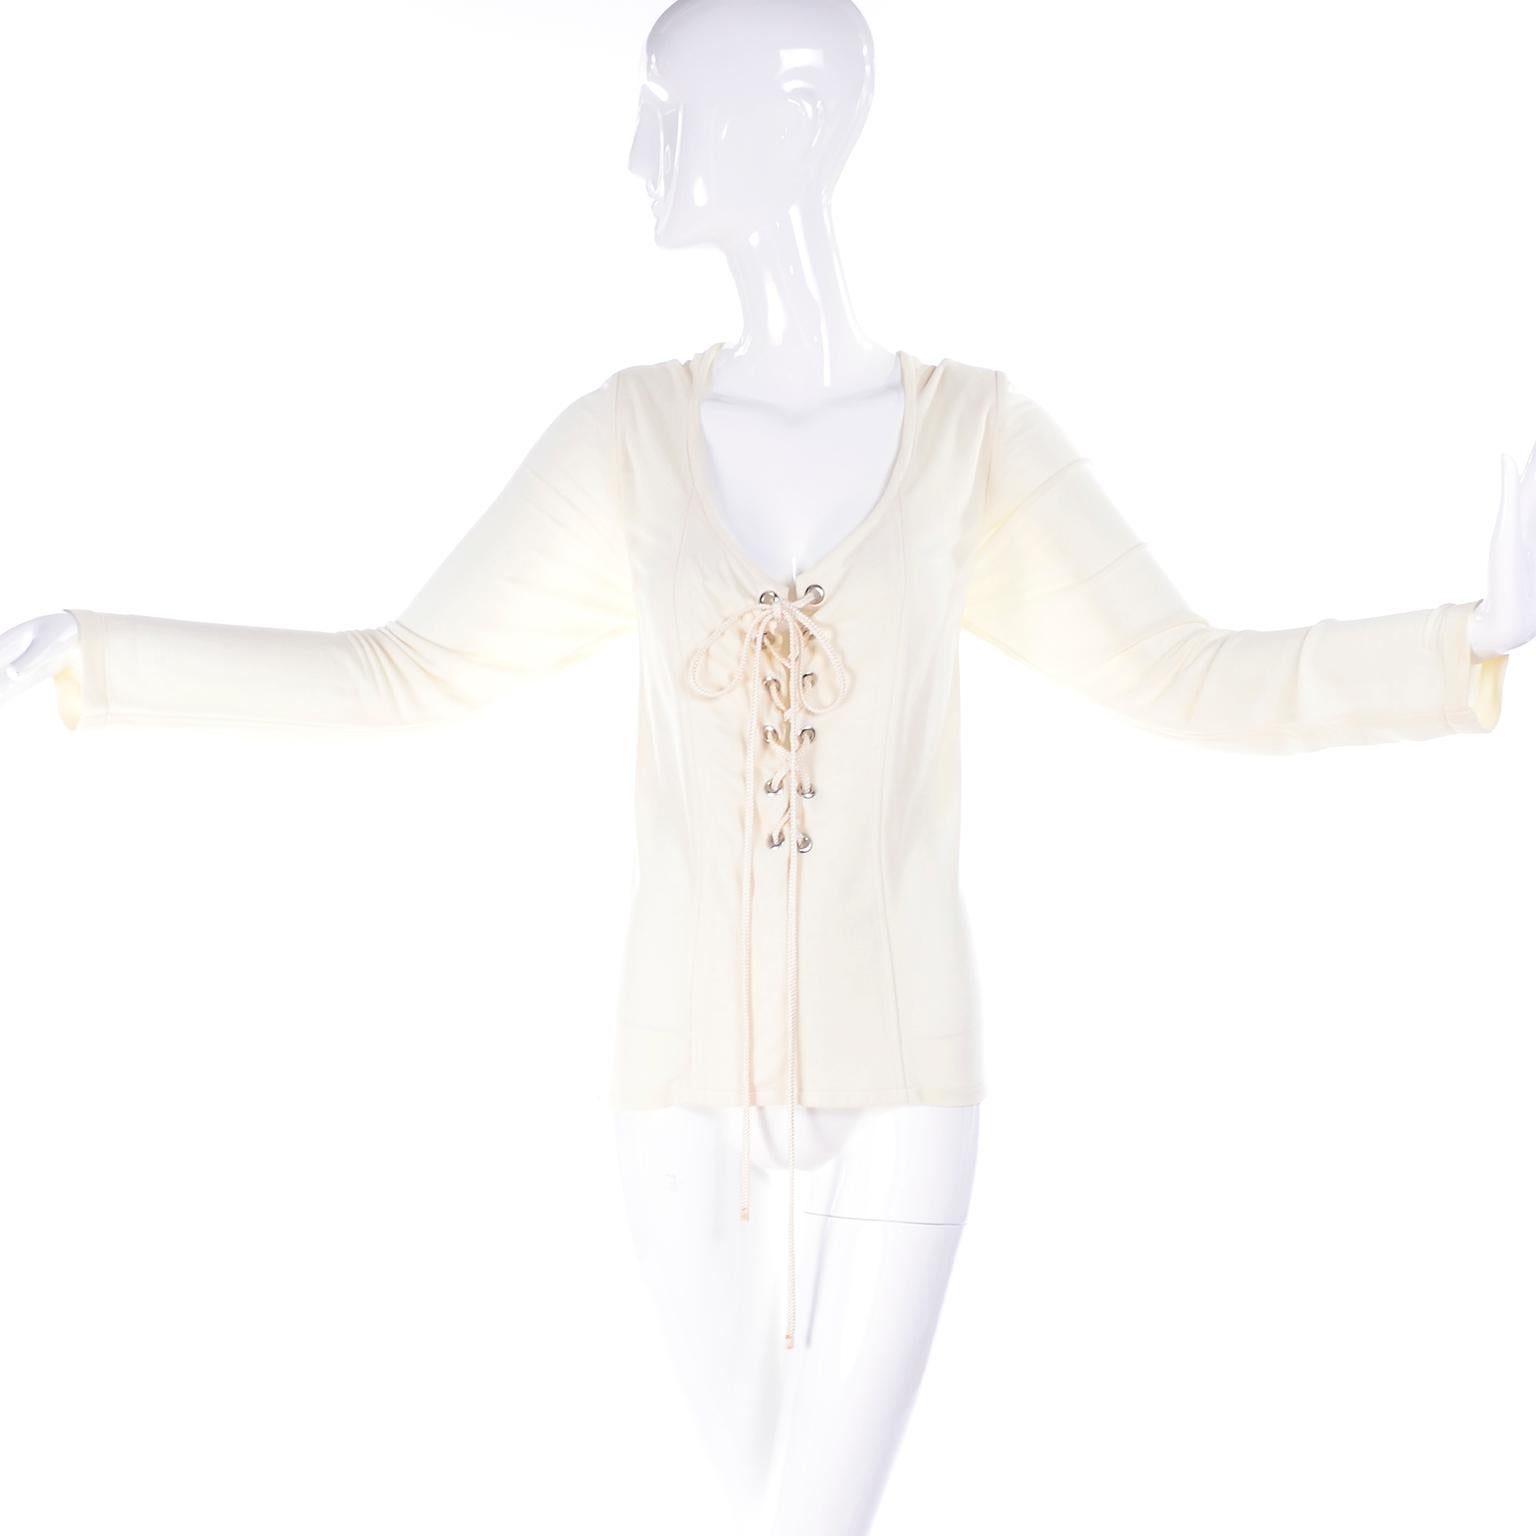 This is a lovely 1990's vintage cream silk or silk blend  jersey top from Yves Saint Laurent in a Victorian style with its corset style lace ties and rivets in the front.  The top is a size 42 and measures like a modern day size 10/12.  Please use